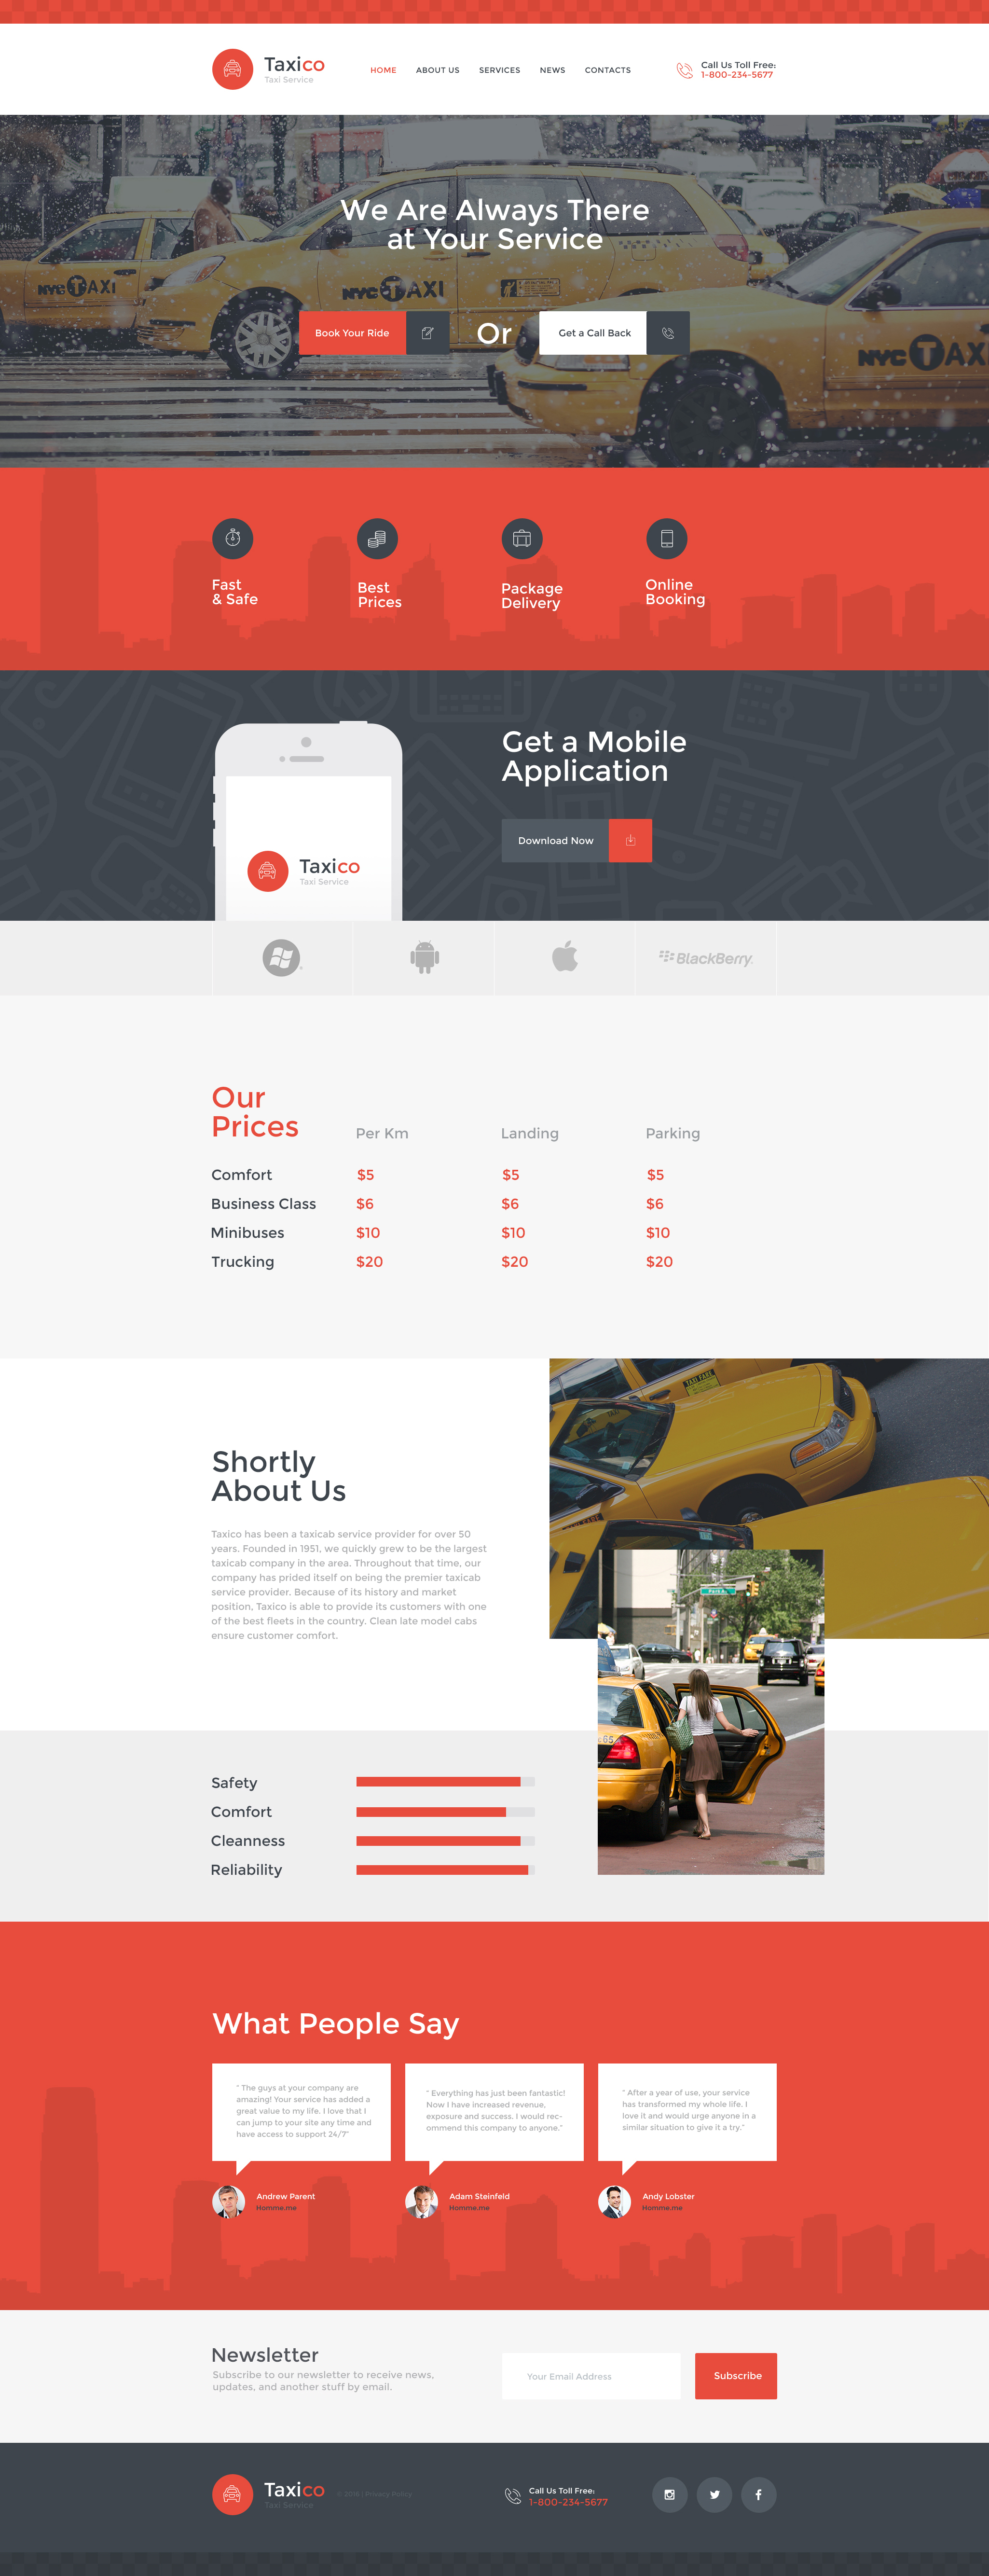 Taxico Website Template